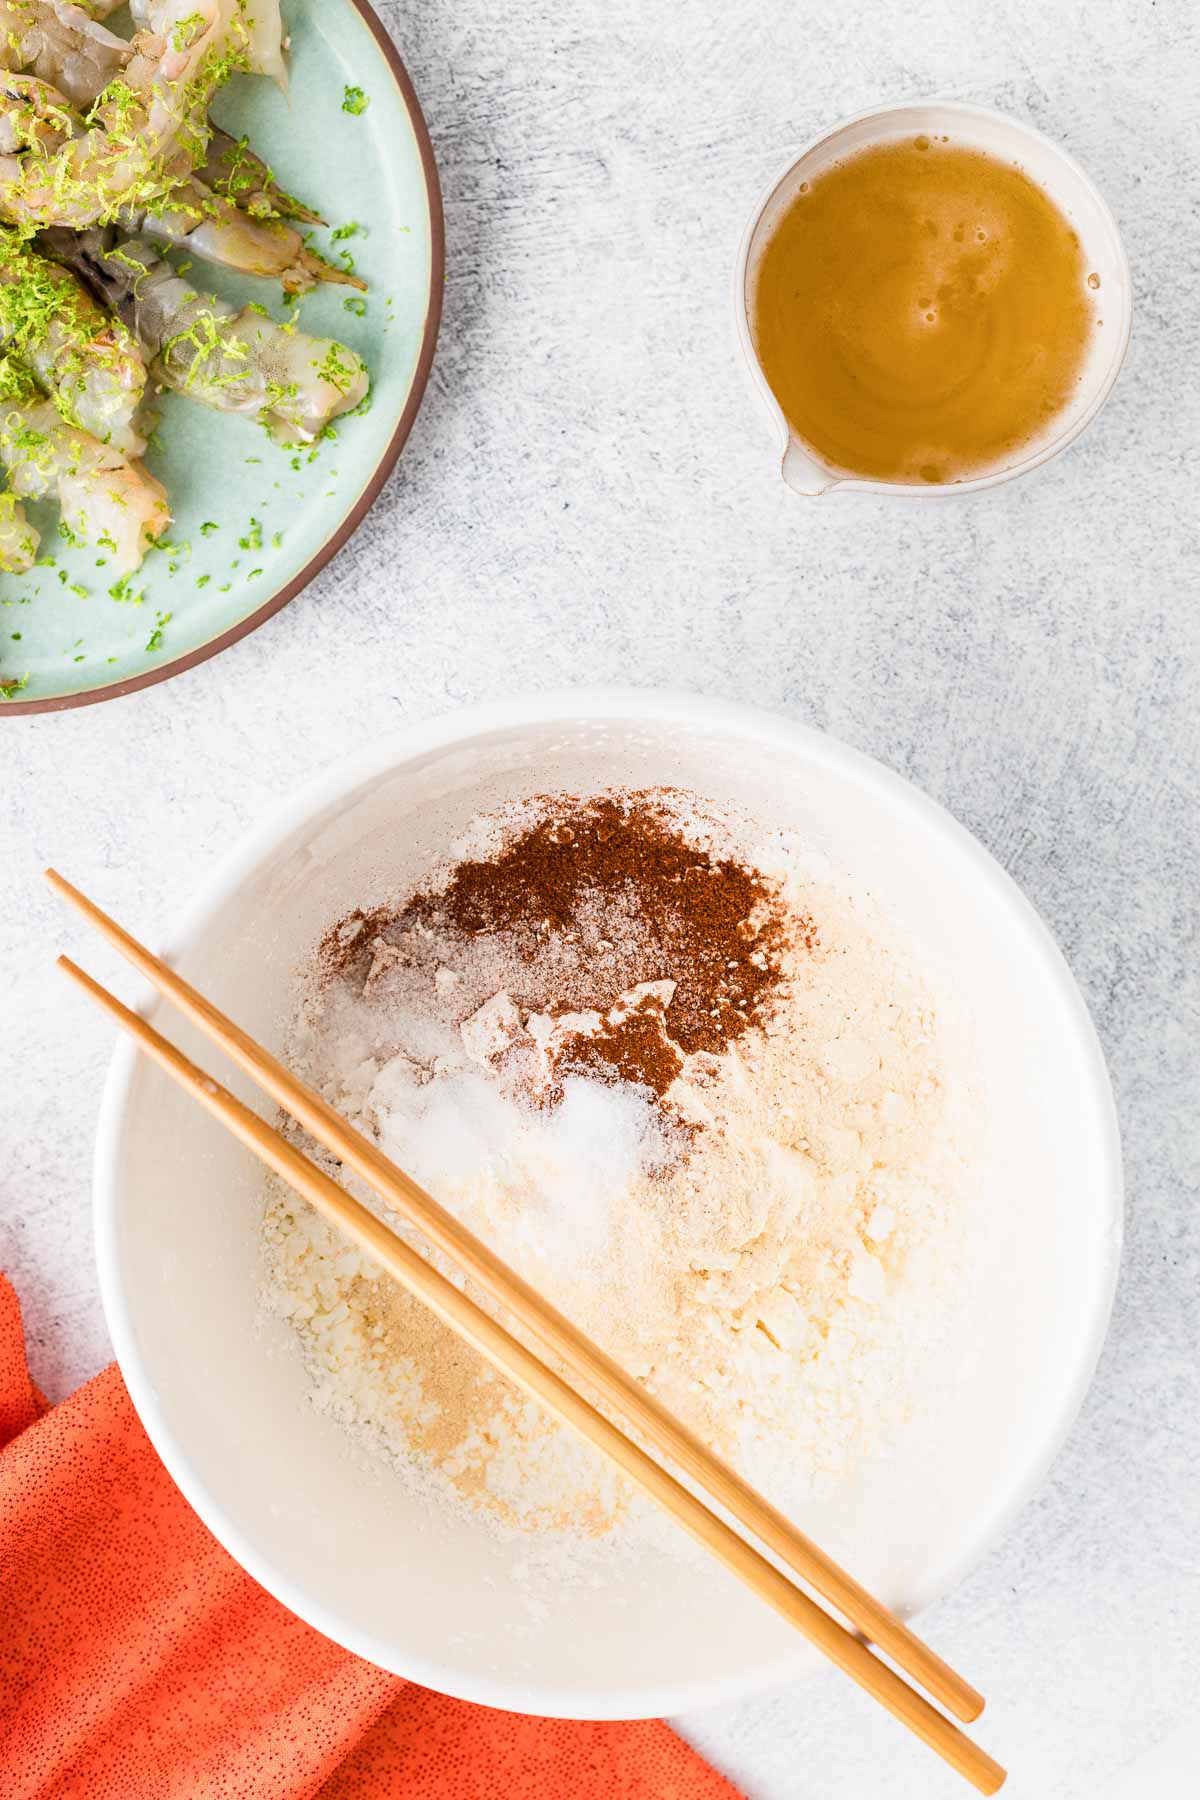 The dry ingredients for beer batter in a dish with chopsticks.